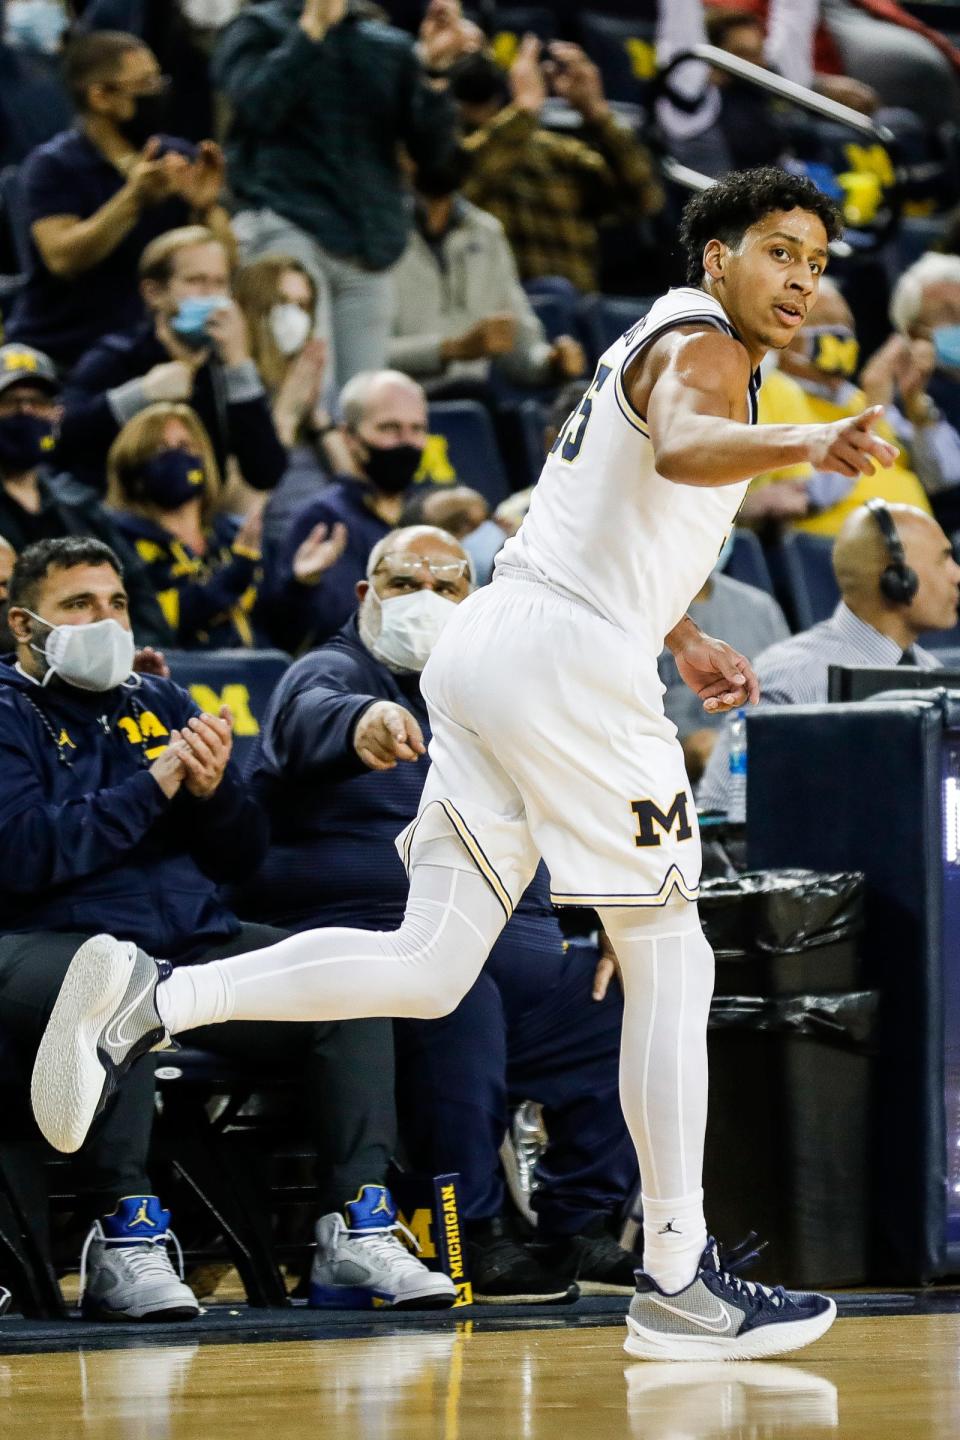 Michigan guard Eli Brooks celebrates a 3-point basket against Iowa during the first half at the Crisler Center in Ann Arbor on Thursday, March 3, 2022.